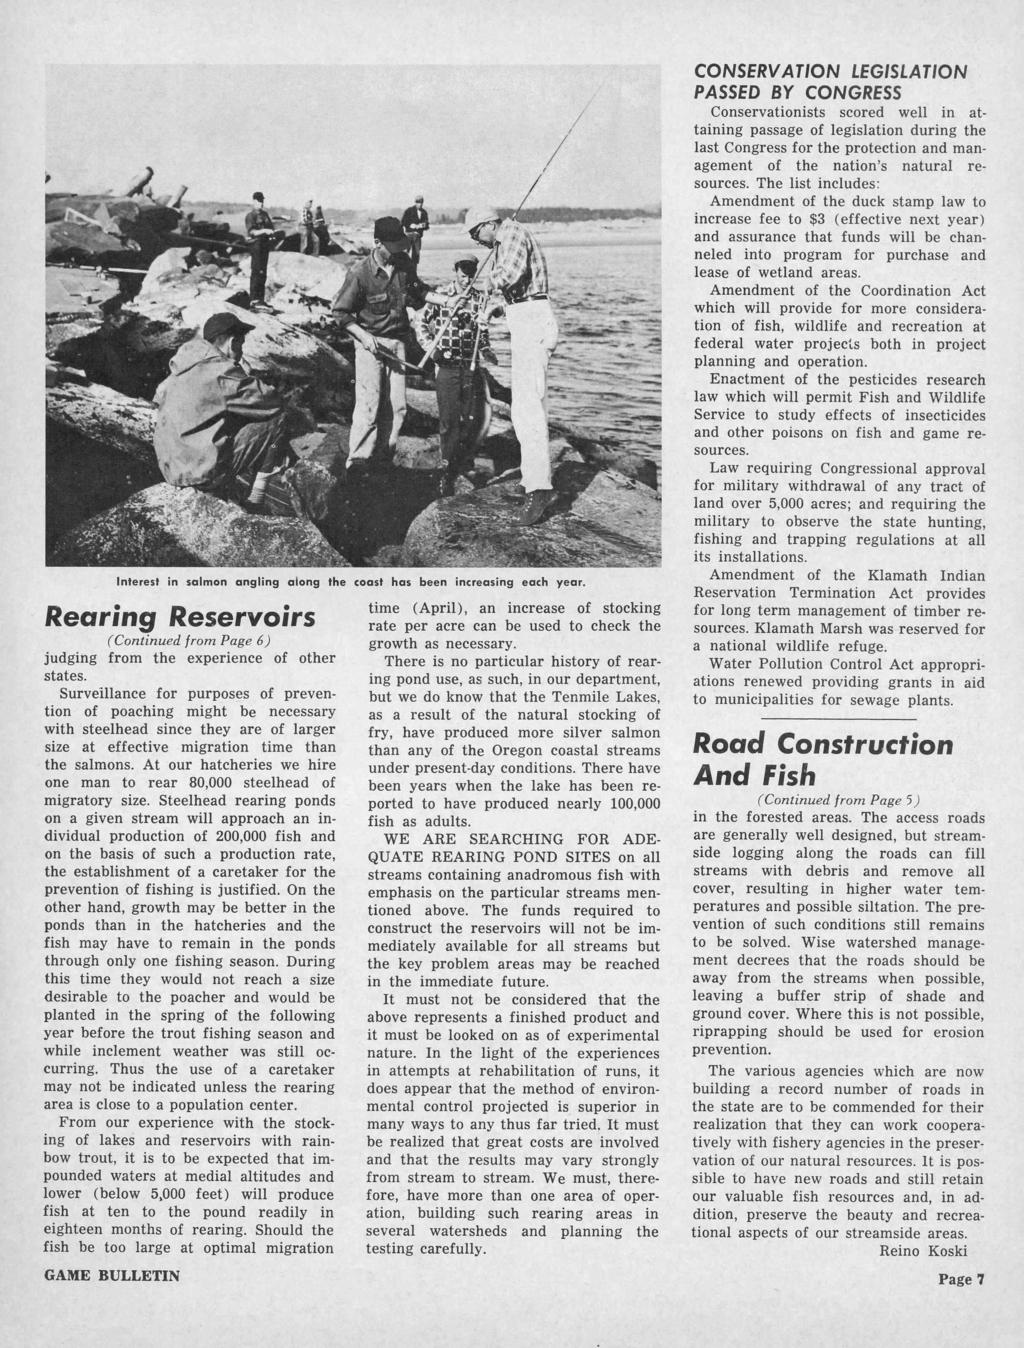 Rearing Reservoirs (Continued from Page 6) judging from the experience of other states.